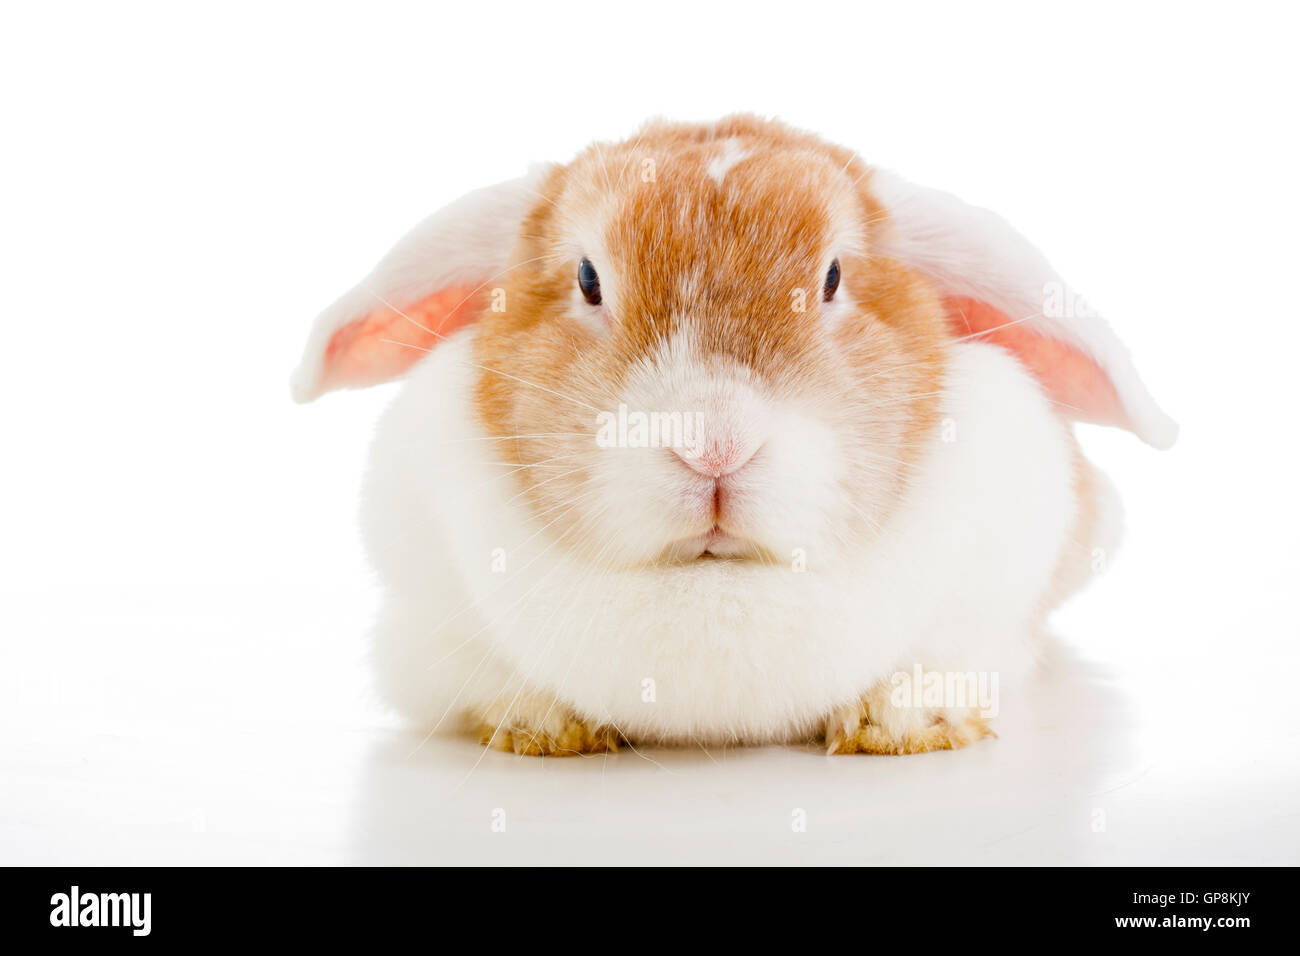 Trained pet white background studio photography. Cute animals close up photos. Purebreed show animal.'wo'ear eared funny bunny Stock Photo